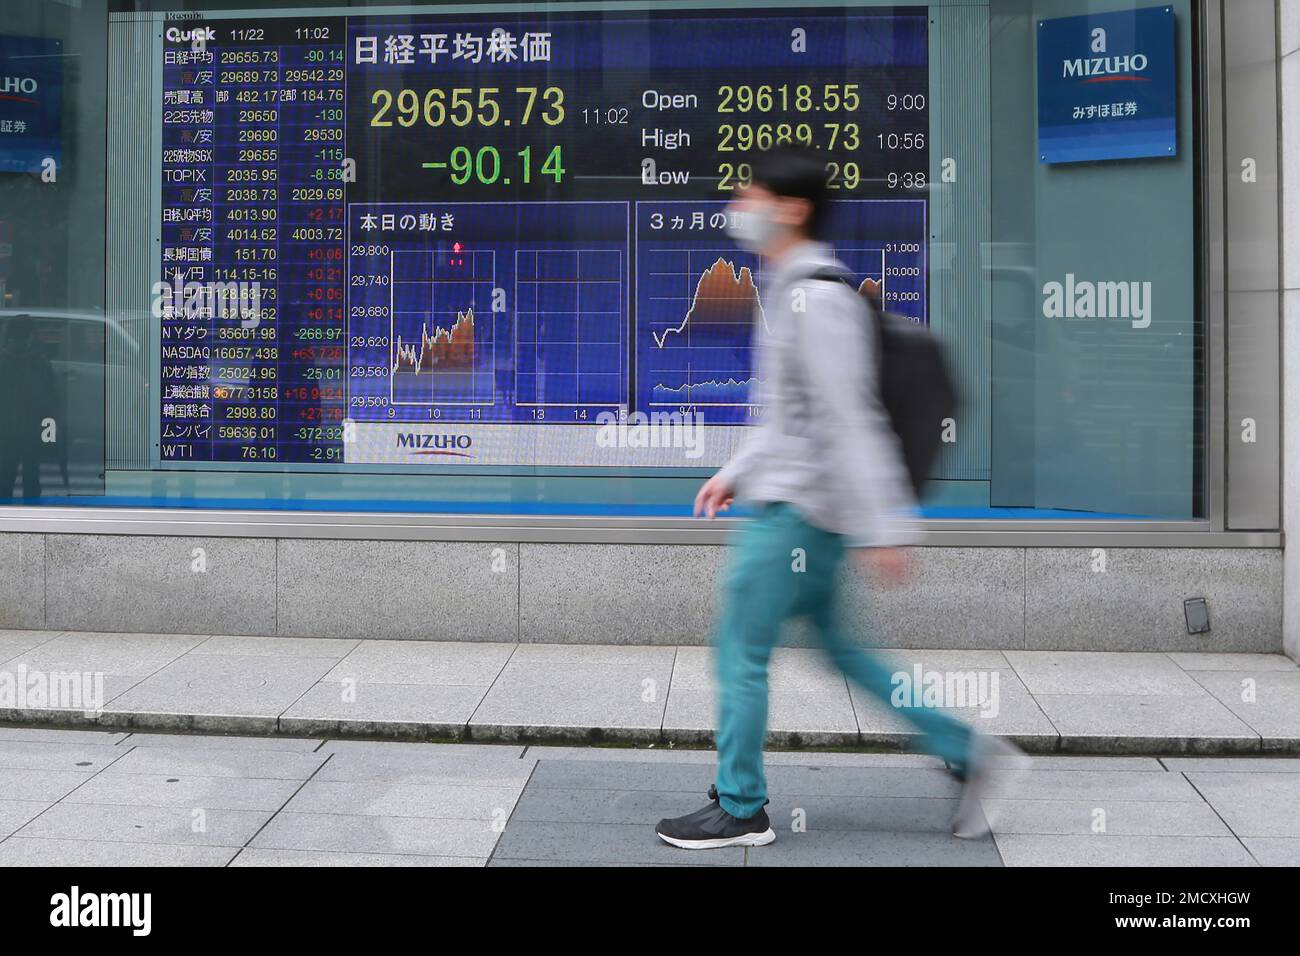 A man walks by an electronic stock board of a securities firm in Tokyo, Monday, Nov. 22, 2021. Stocks were mixed in Asia on Monday after ending the week mostly lower on Wall Street, despite the Nasdaq's first close above 16,000. (AP Photo/Koji Sasahara) Stock Photo